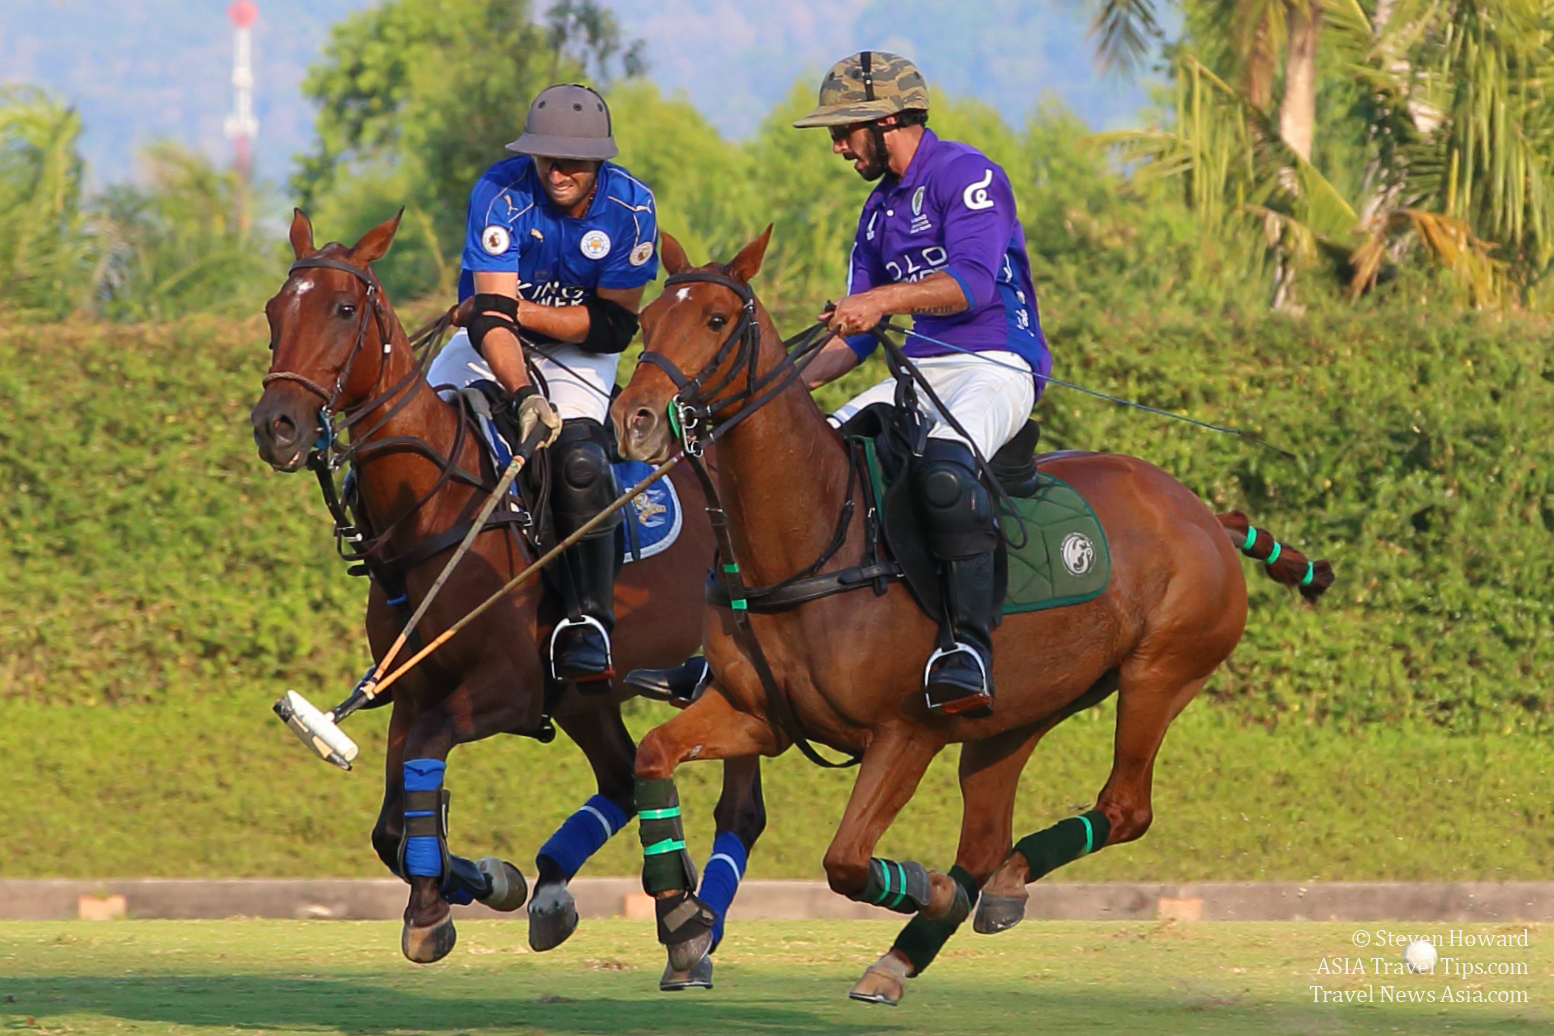 The 137 Pillars Polo Puissance Cup and James Ashton Trophy takes place each year at Polo Escape in Pattaya, Thailand. This year’s 137 Pillars Polo Puissance Cup and James Ashton Trophy attracted some of the top names in horse polo including the Kalaan brothers – Uday and Angad, Fernando Rivera, Santiago Lujan, Nicolas Pieroni and some of Thailand’s top home-grown talents and upcoming stars such as Nutthadith Sila-Amornsak, Satid Wongkraso and Cliff Punyanitya, to name but a few. Click to enlarge.